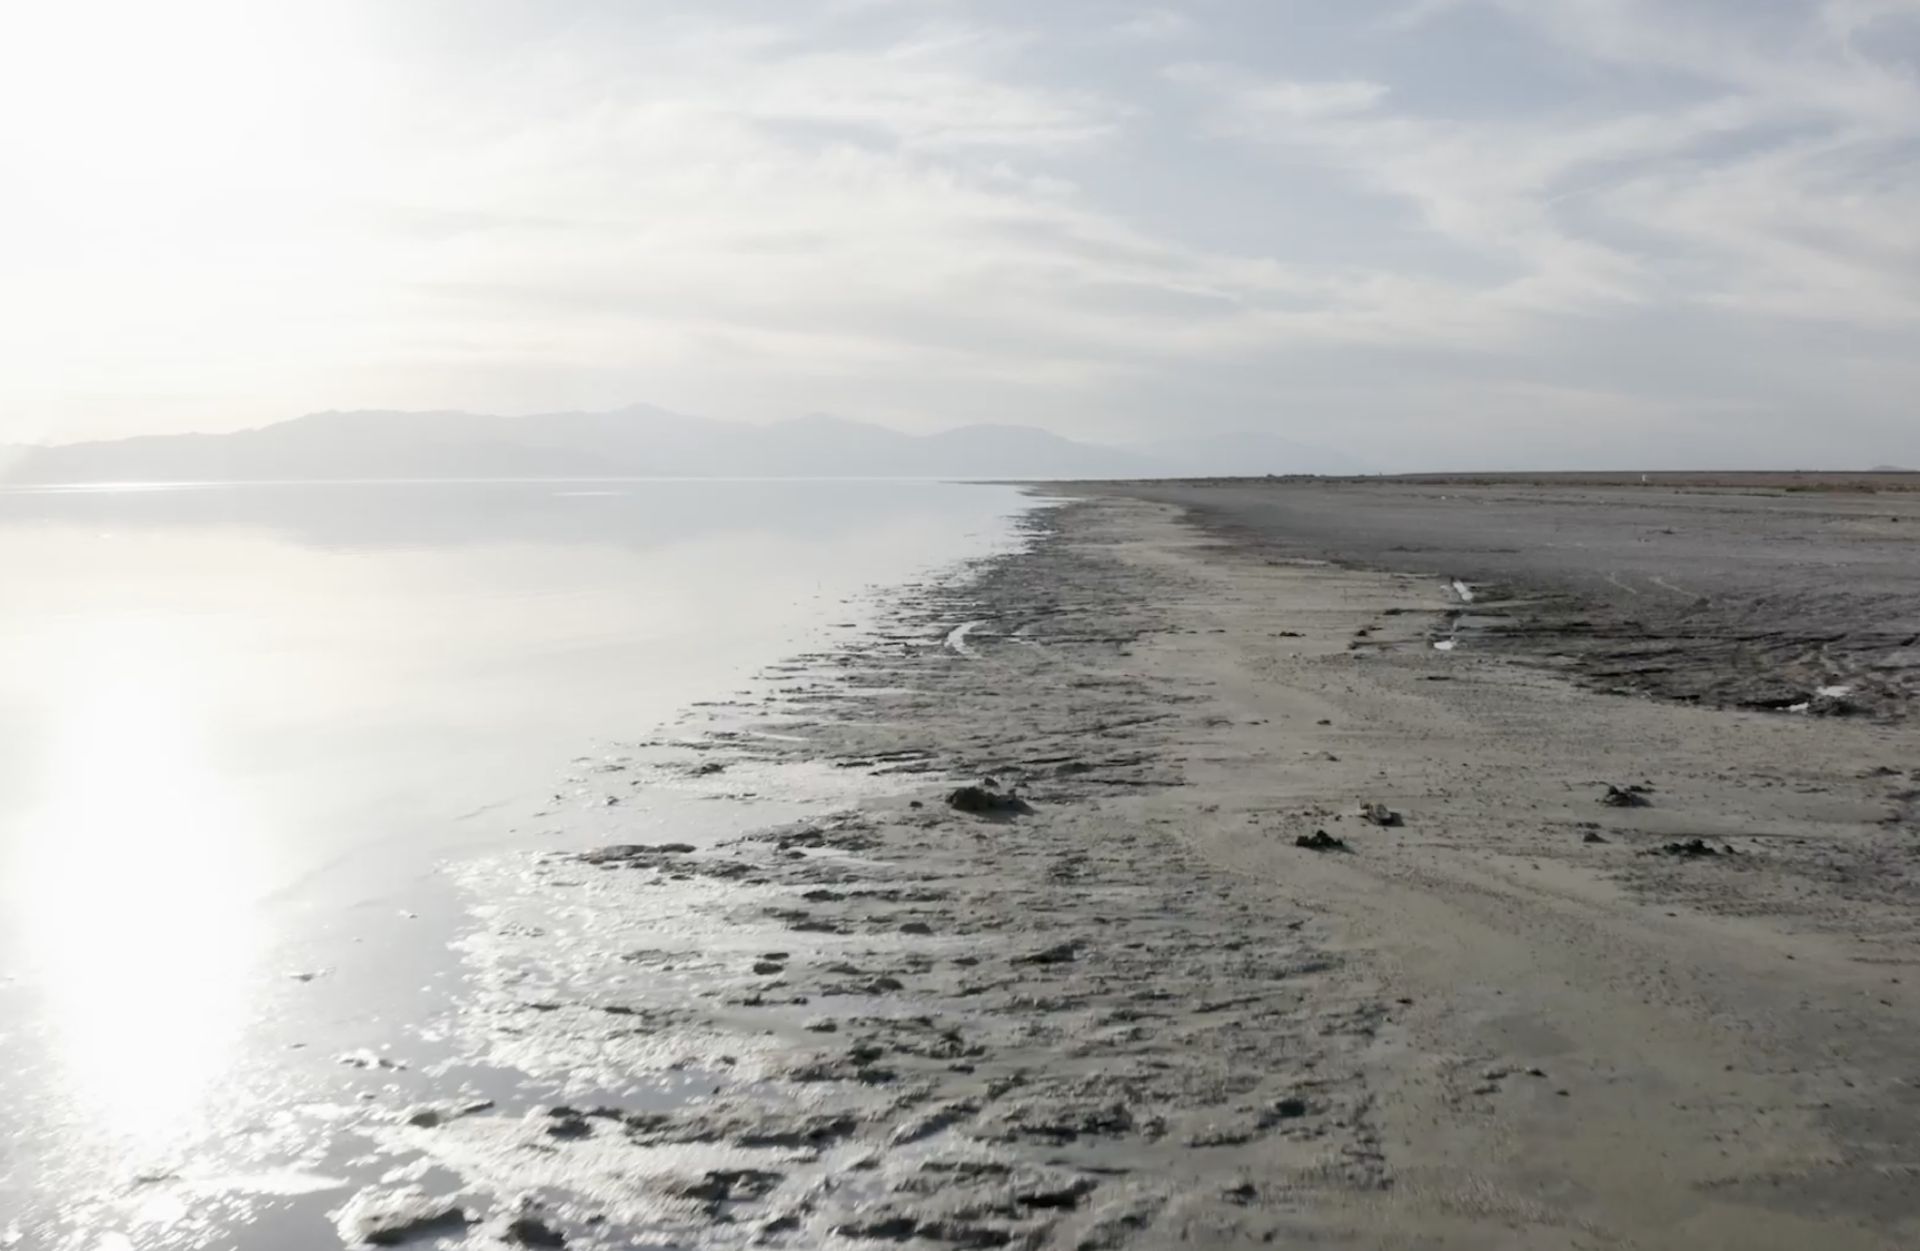 Almost 12 Acres in Southern California: Discover Imperial County's Potential by the Salton Sea! - Image 15 of 16